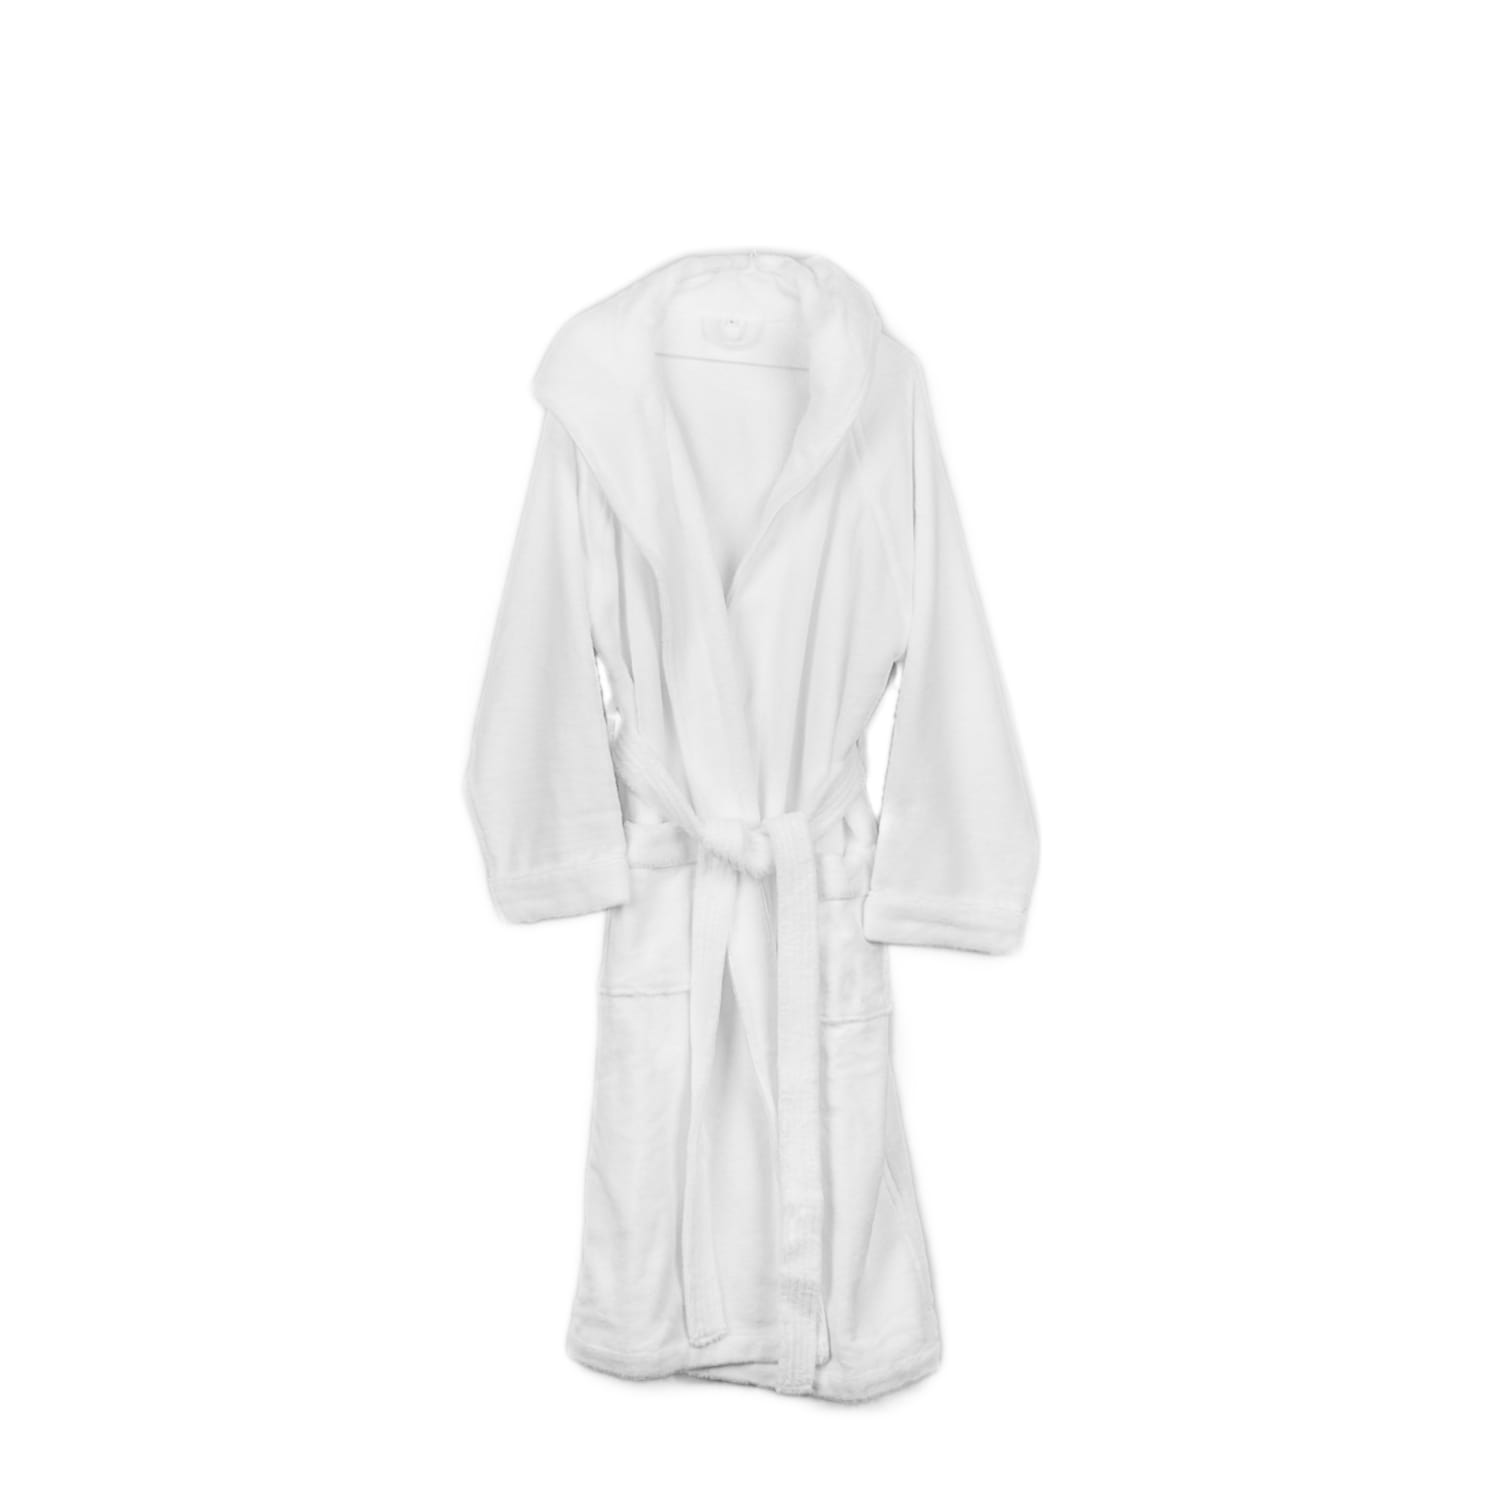 White Super-Soft Hooded Bath Robe Small Tielle Love Luxury by Tradelinens